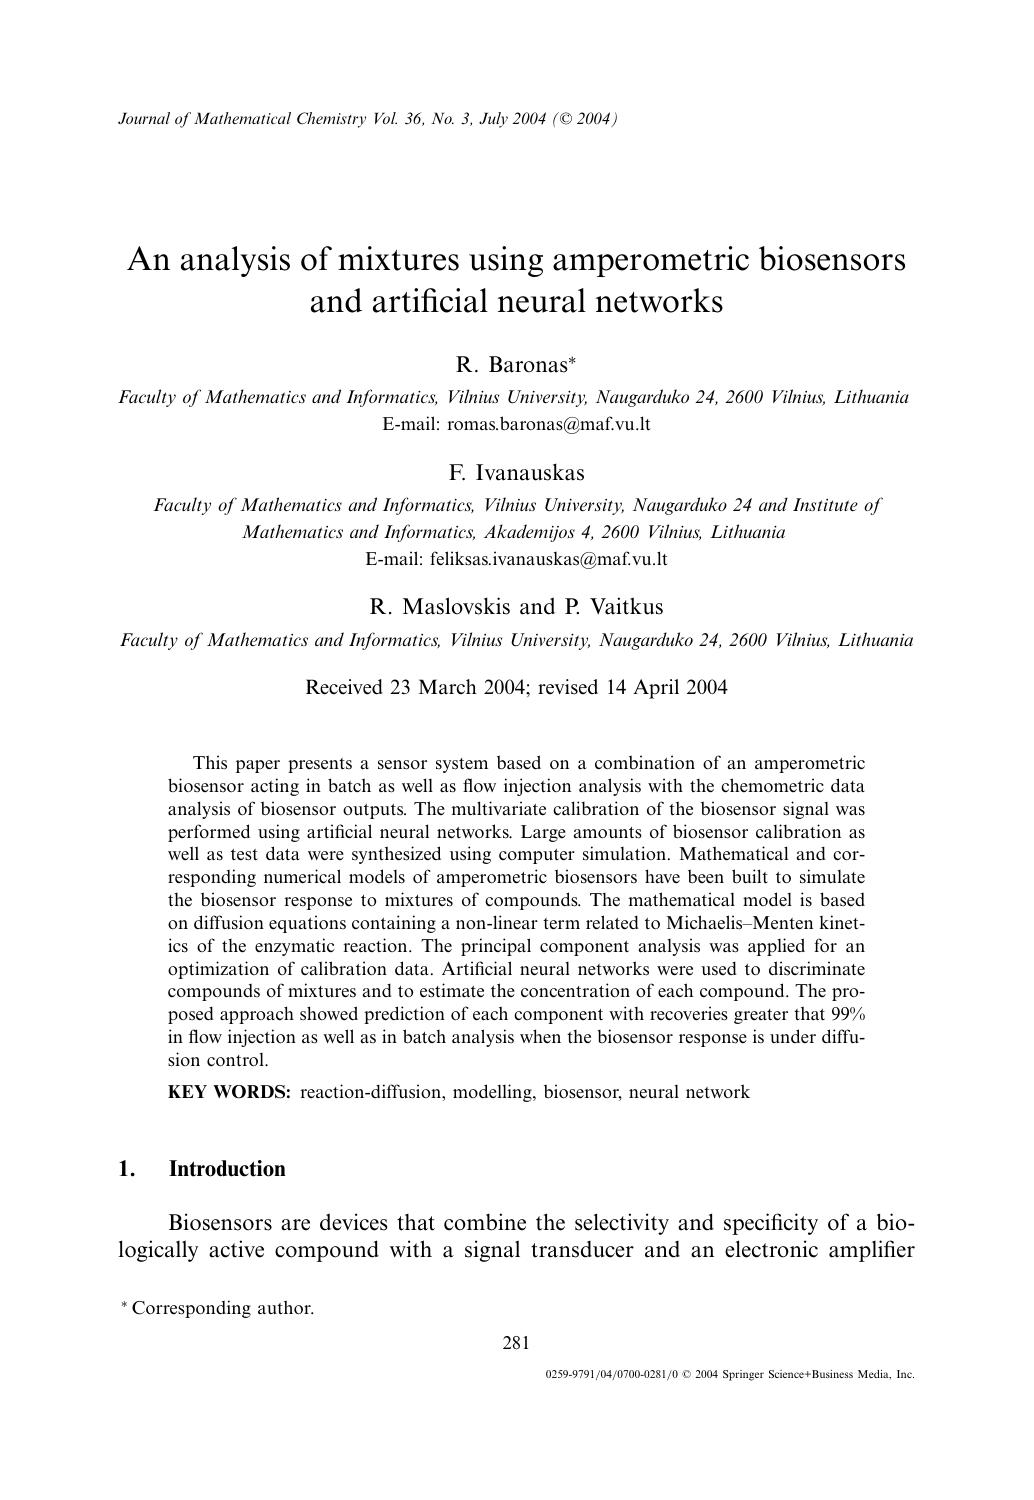 An Analysis of Mixtures Using Amperometric Biosensors and Artificial Neural Networks by Unknown